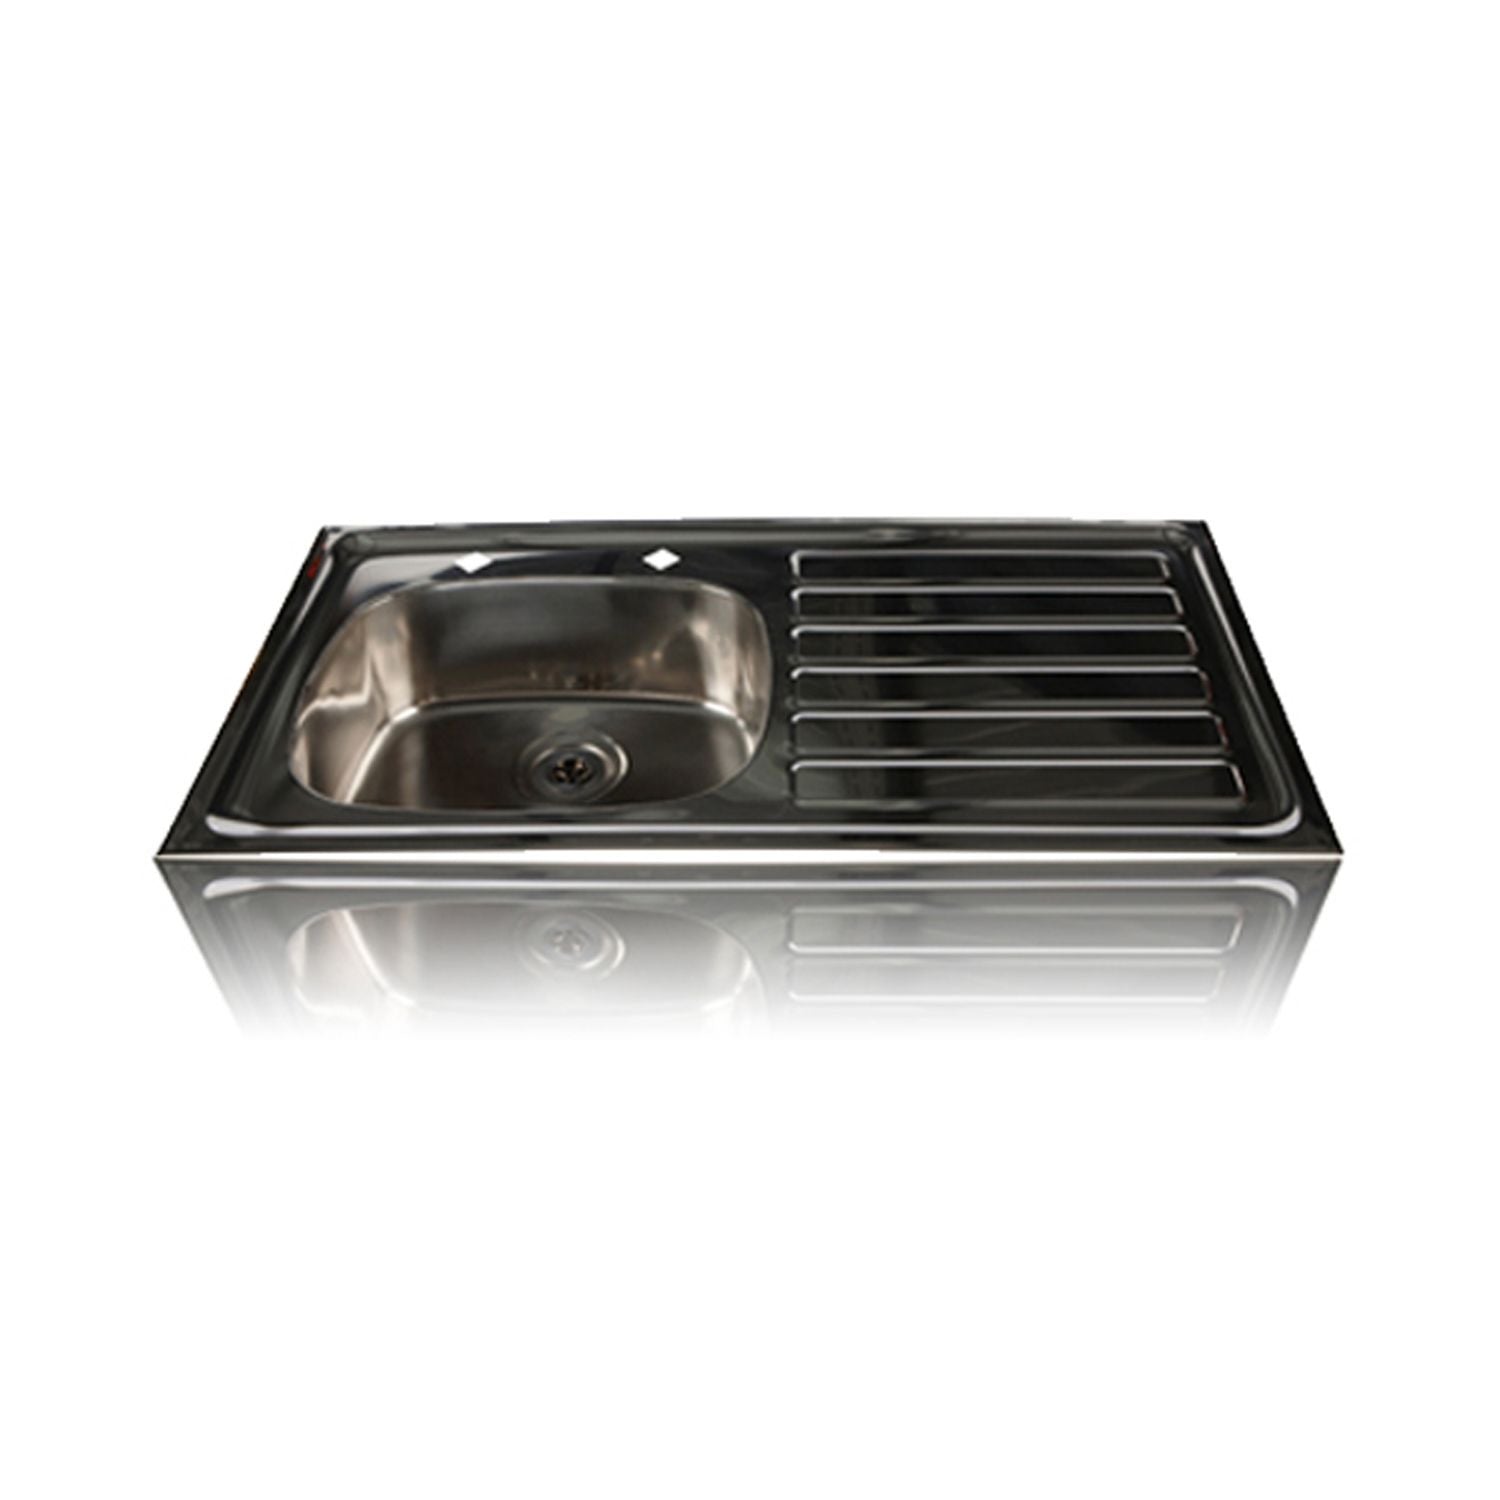 Sunflower HTM64 Compliant Inset Stainless Steel Sink | Left Hand Drainer